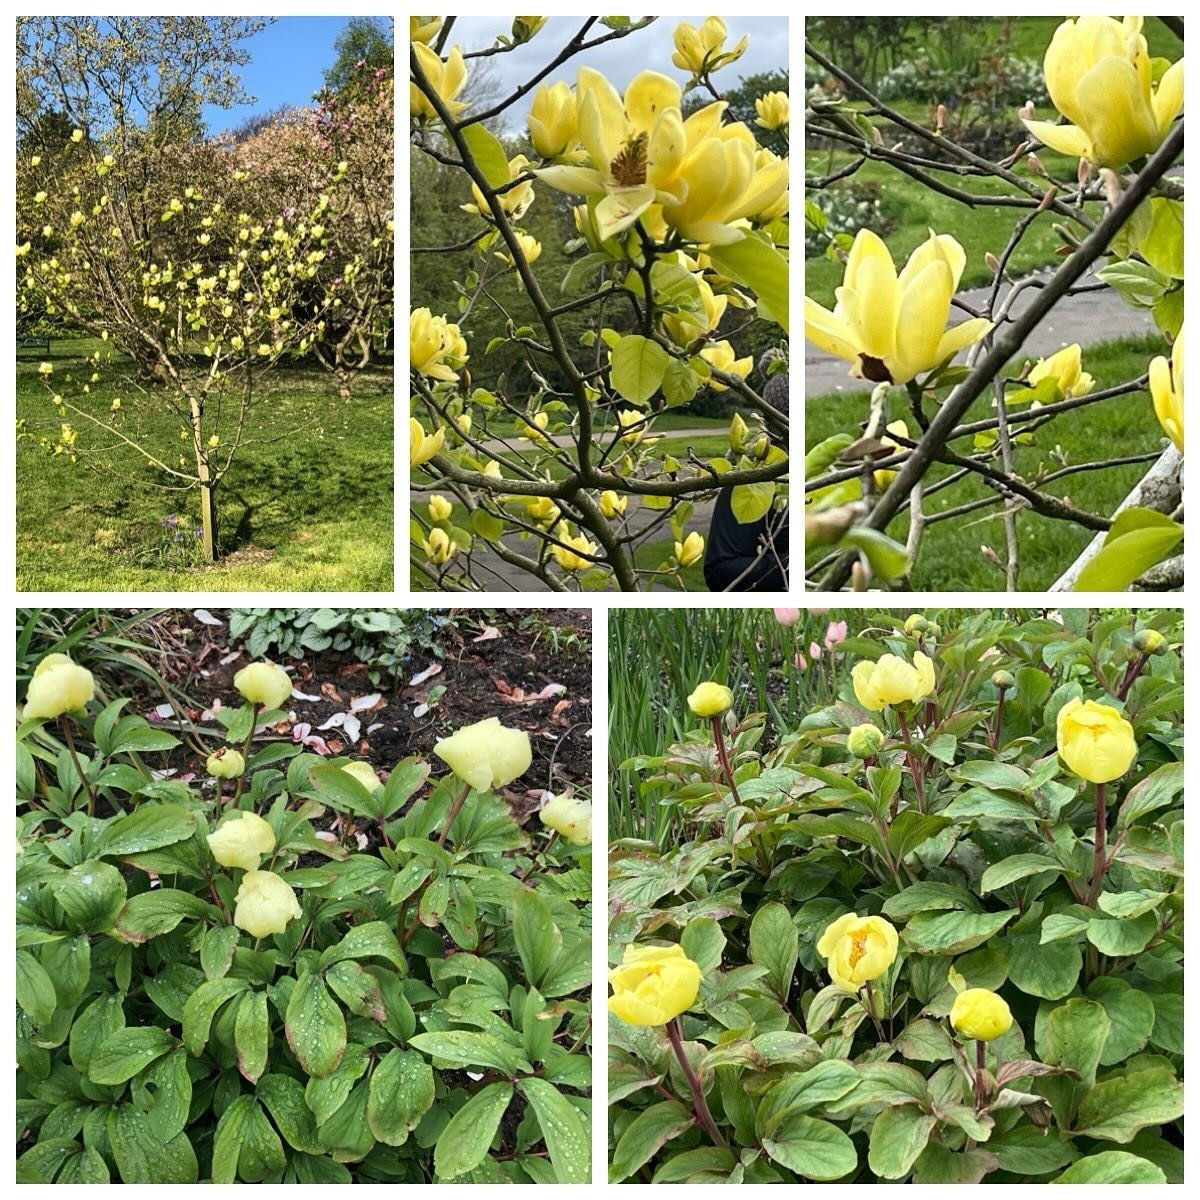 Despite an early appearance, the sun proved a little elusive again today, so we&rsquo;re showcasing these lovely yellow magnolias and peonies, recently blooming in #sheffieldbotanicalgardens as a sun substitute&hellip;&hellip;..
Though forecast looks